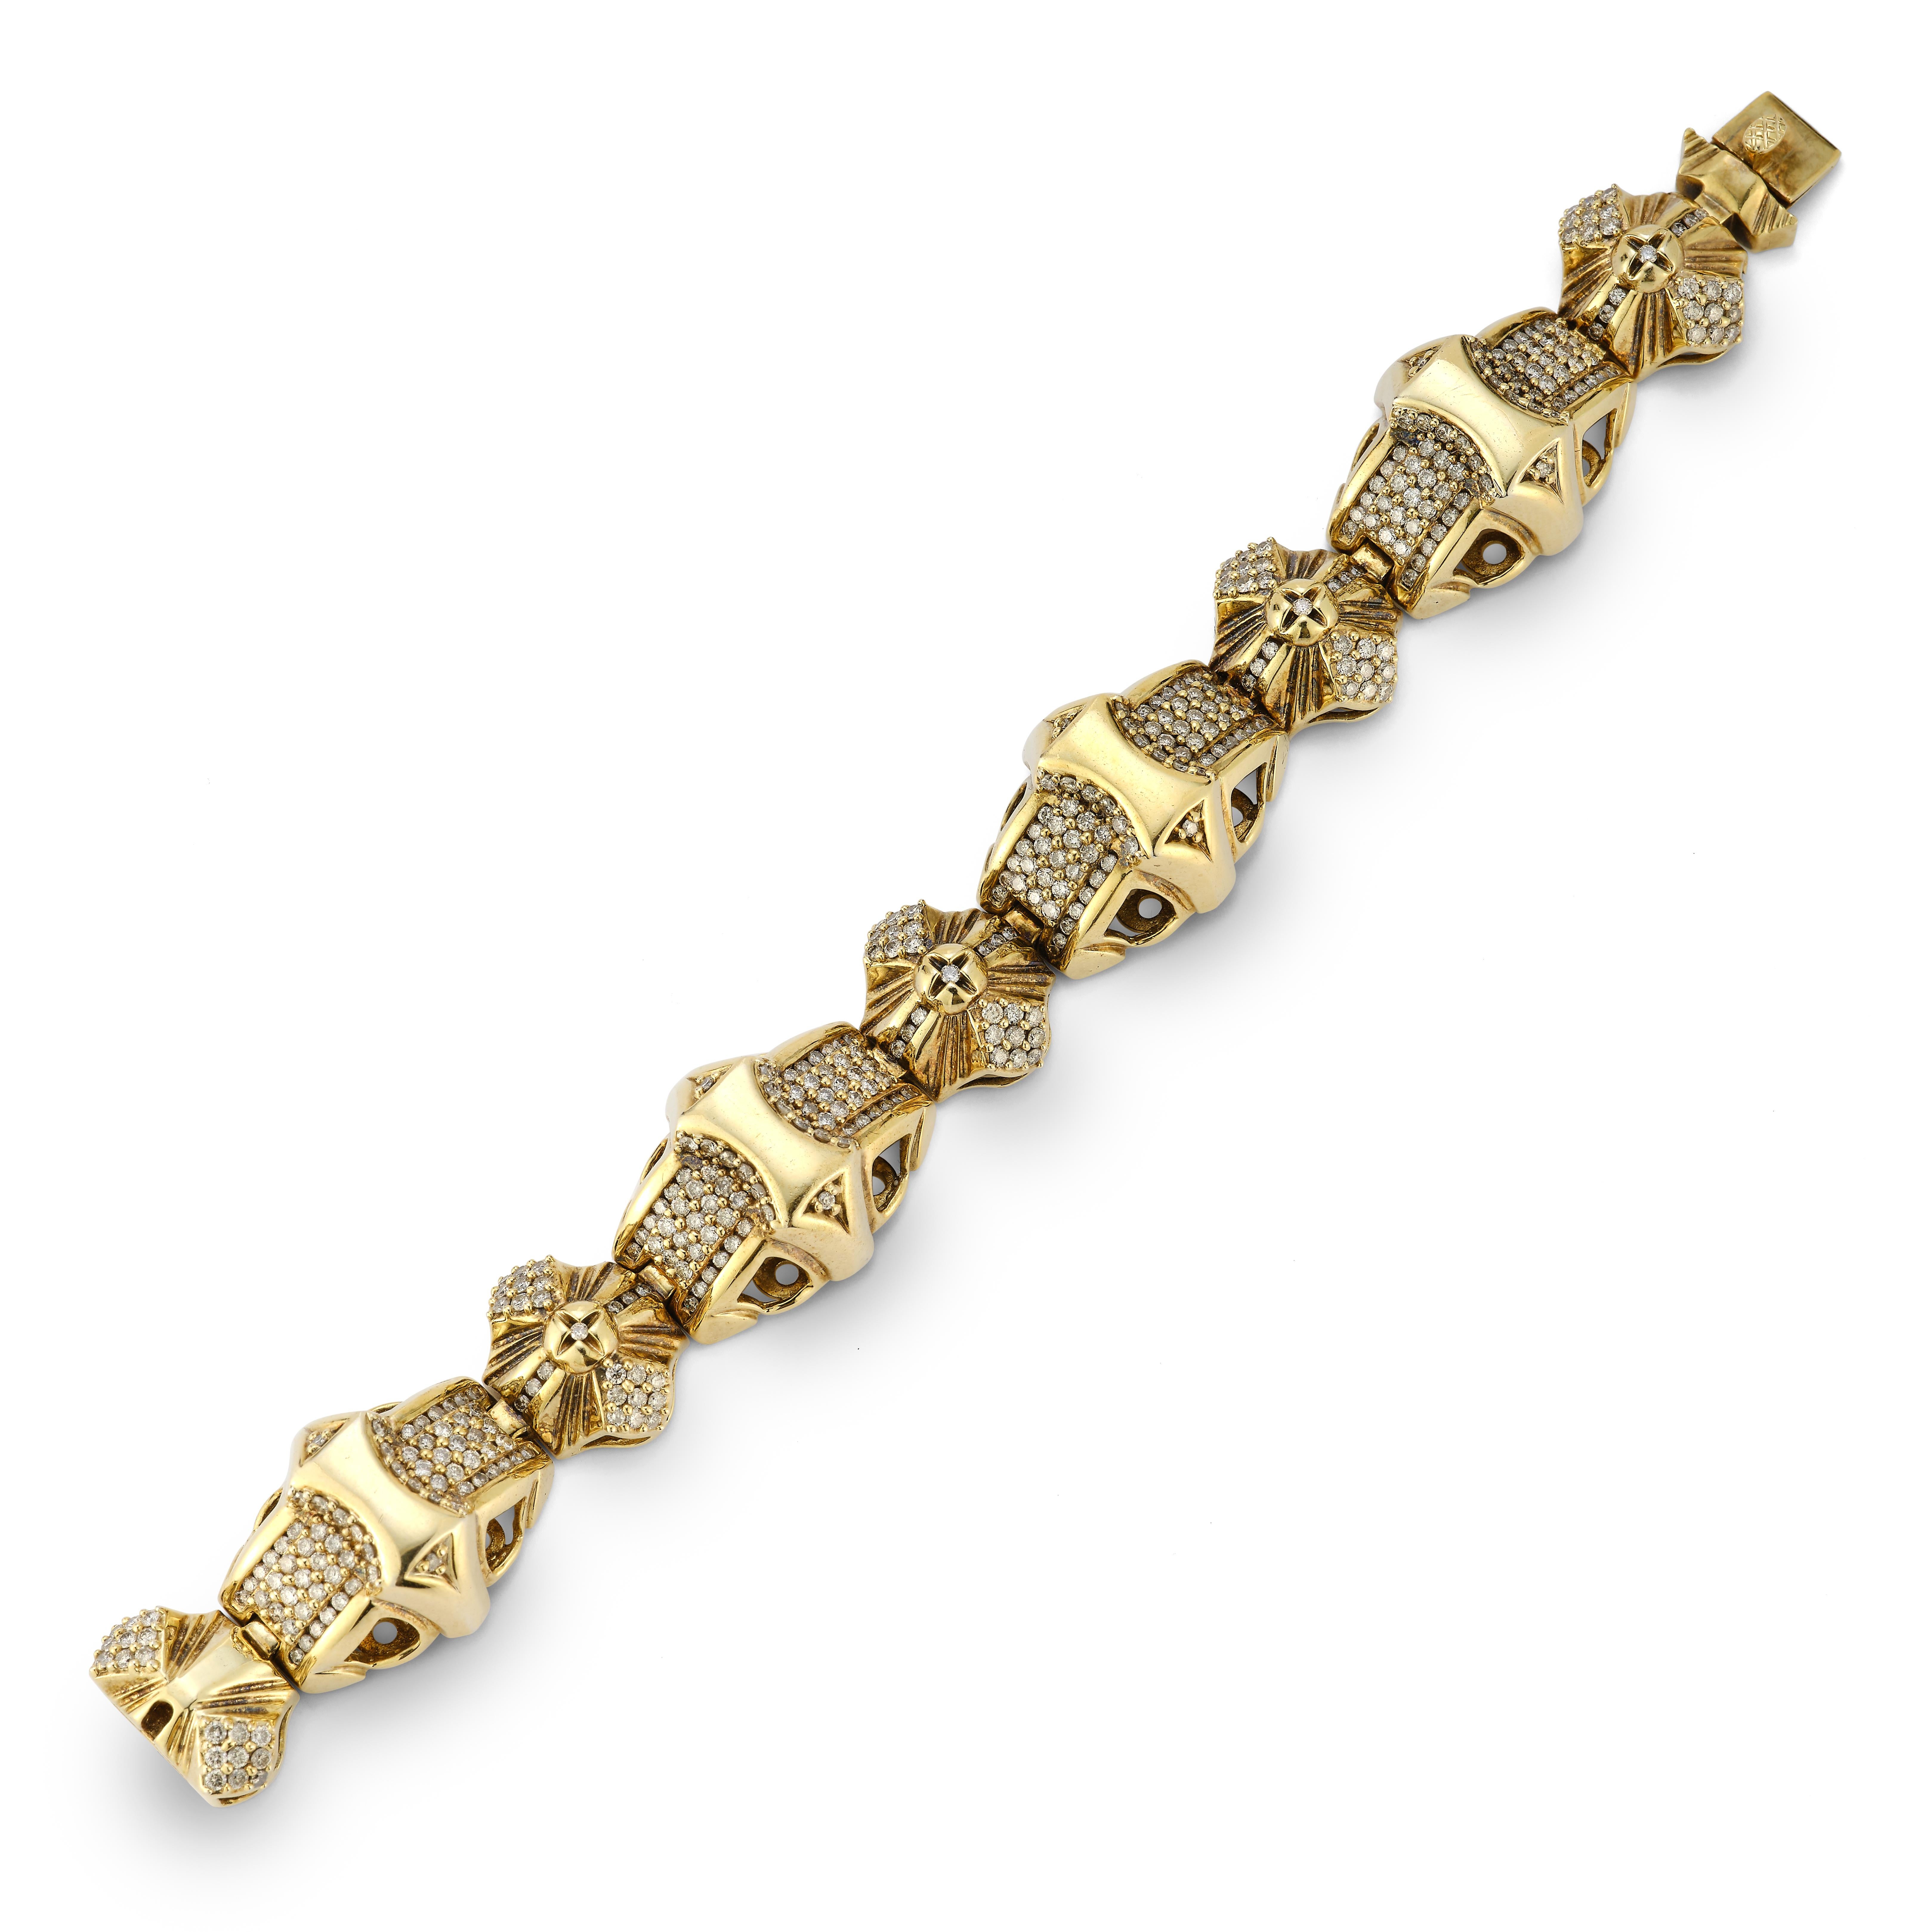 Men's Pave Diamond & Gold Bracelet 

Geometric gold links with 390 pave diamonds set in 14k yellow gold.

Diamond total approximate weight: 11.7ct

Measurements: 7